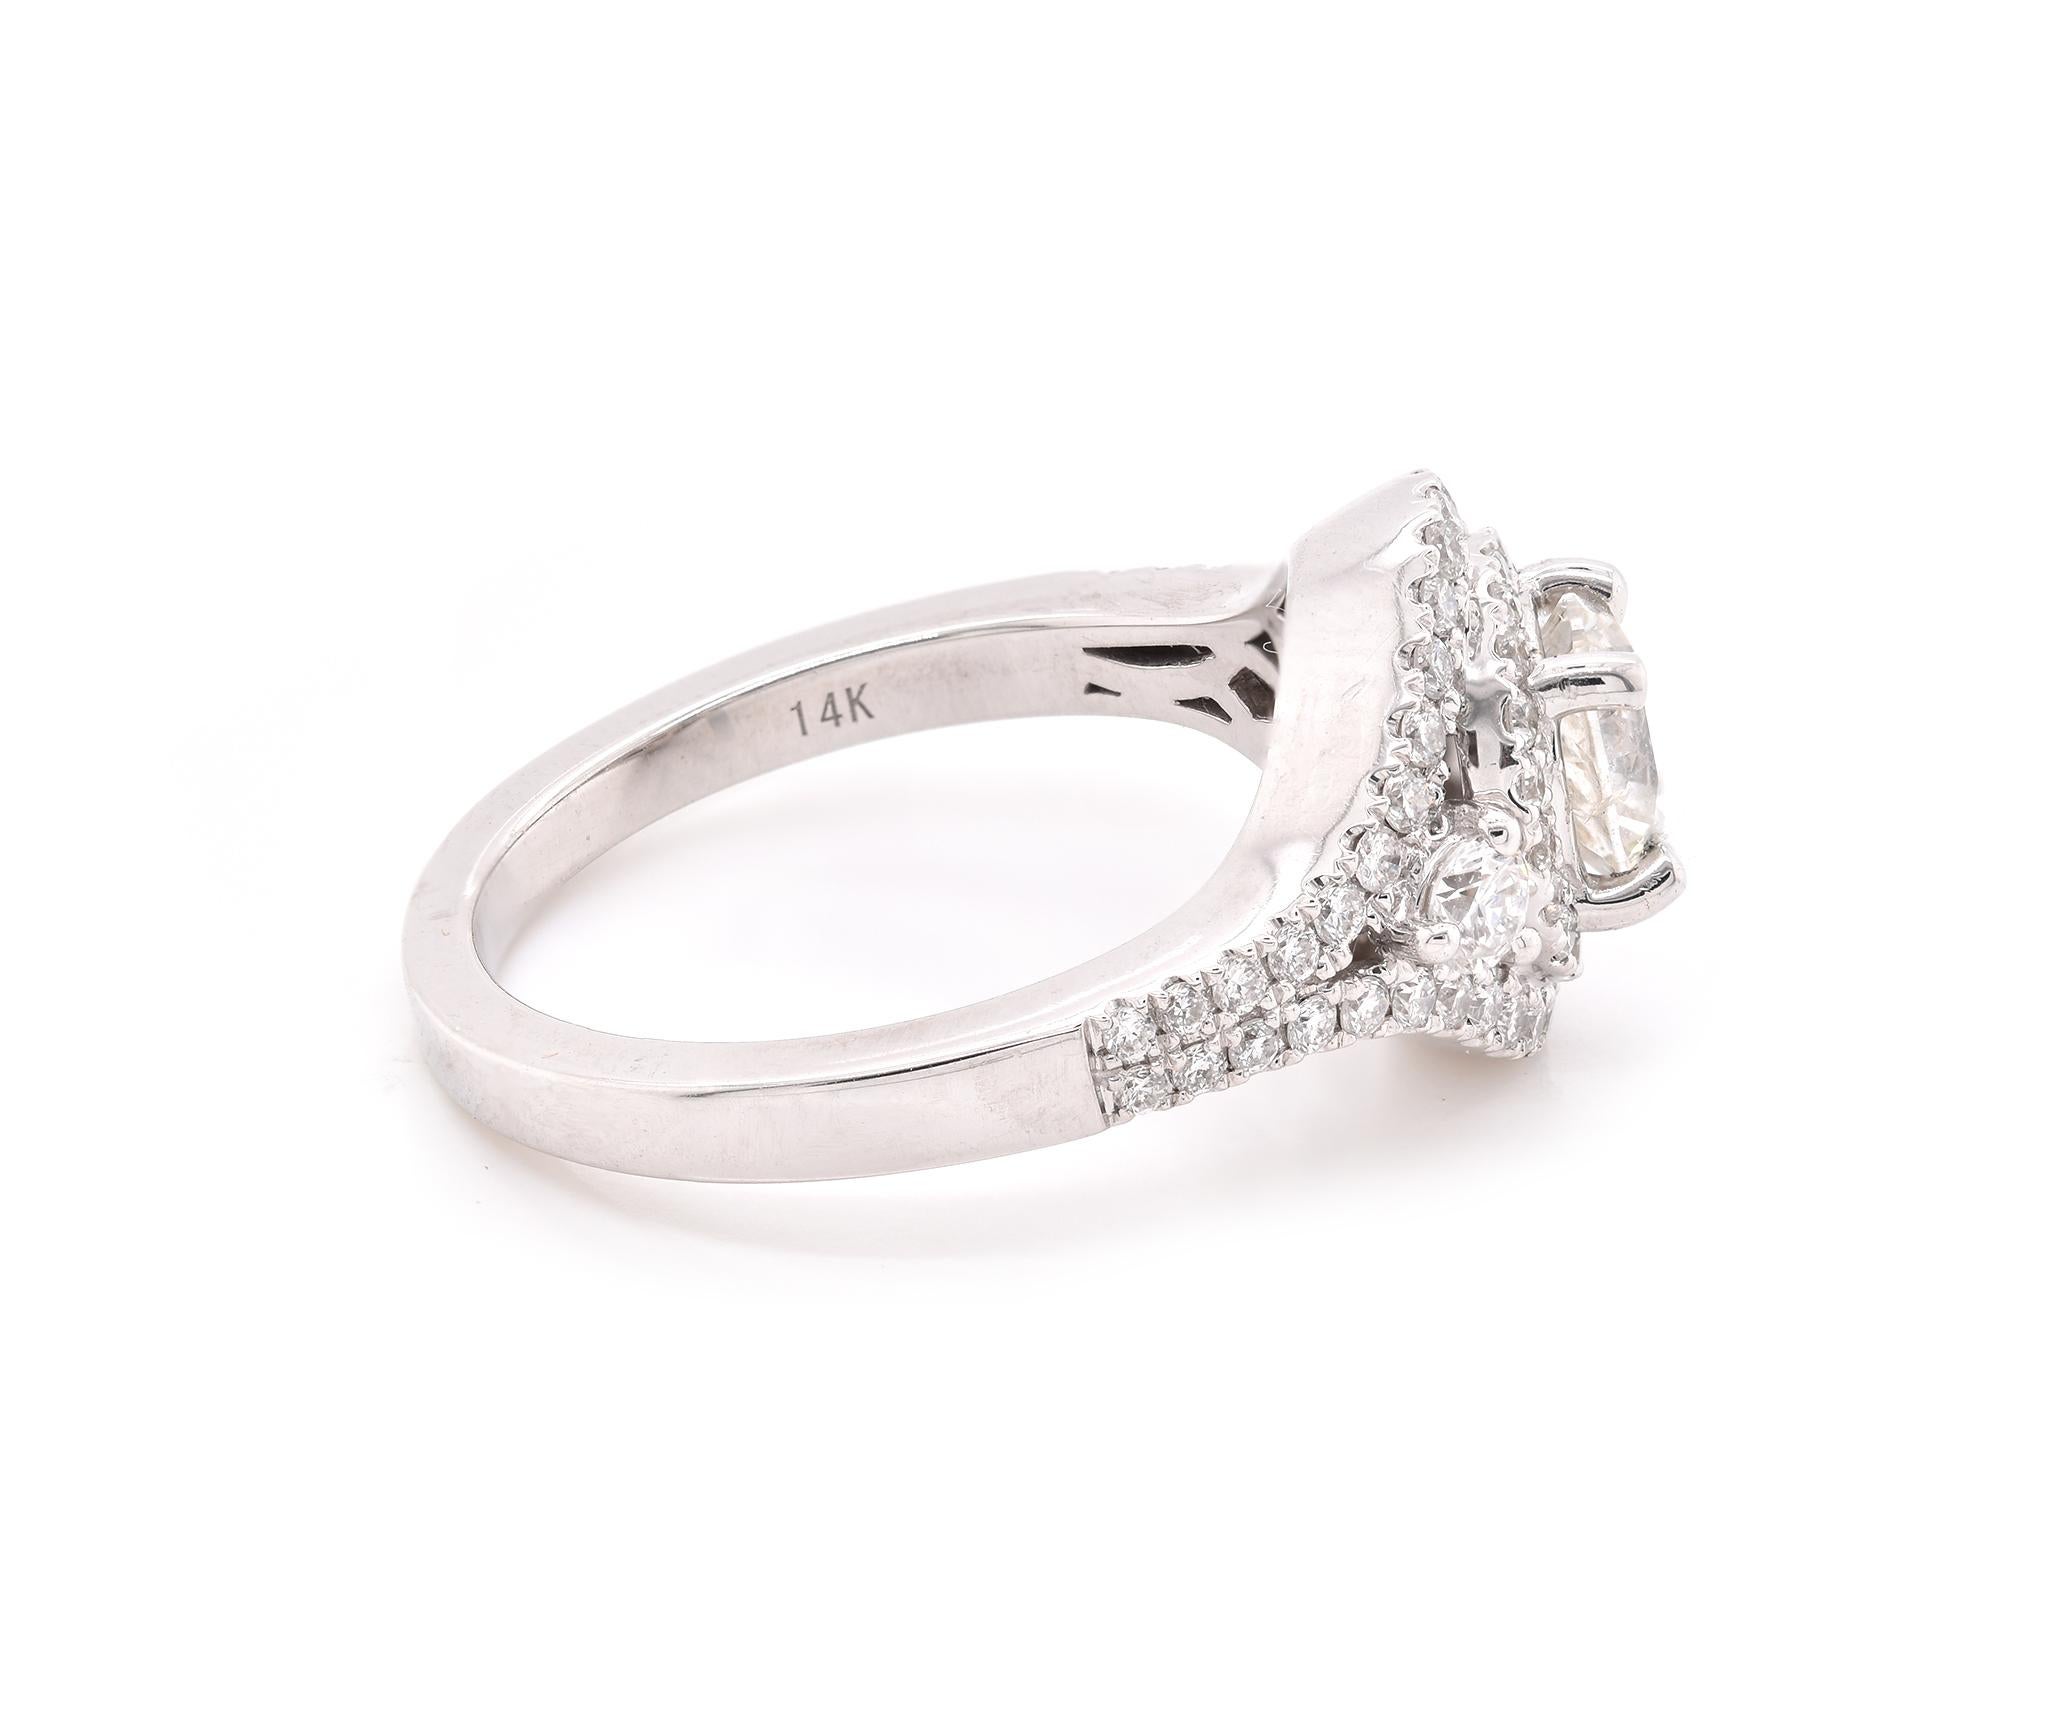 Designer: custom
Material: 14K white gold
Center Diamond: 1 round brilliant cut = 0.85ct
Color: I
Clarity: SI2
Diamond: 88 round brilliant cut = 1.04cttw
Color: G
Clarity: SI1
Ring Size: 6.5 (please allow up to 2 additional business days for sizing